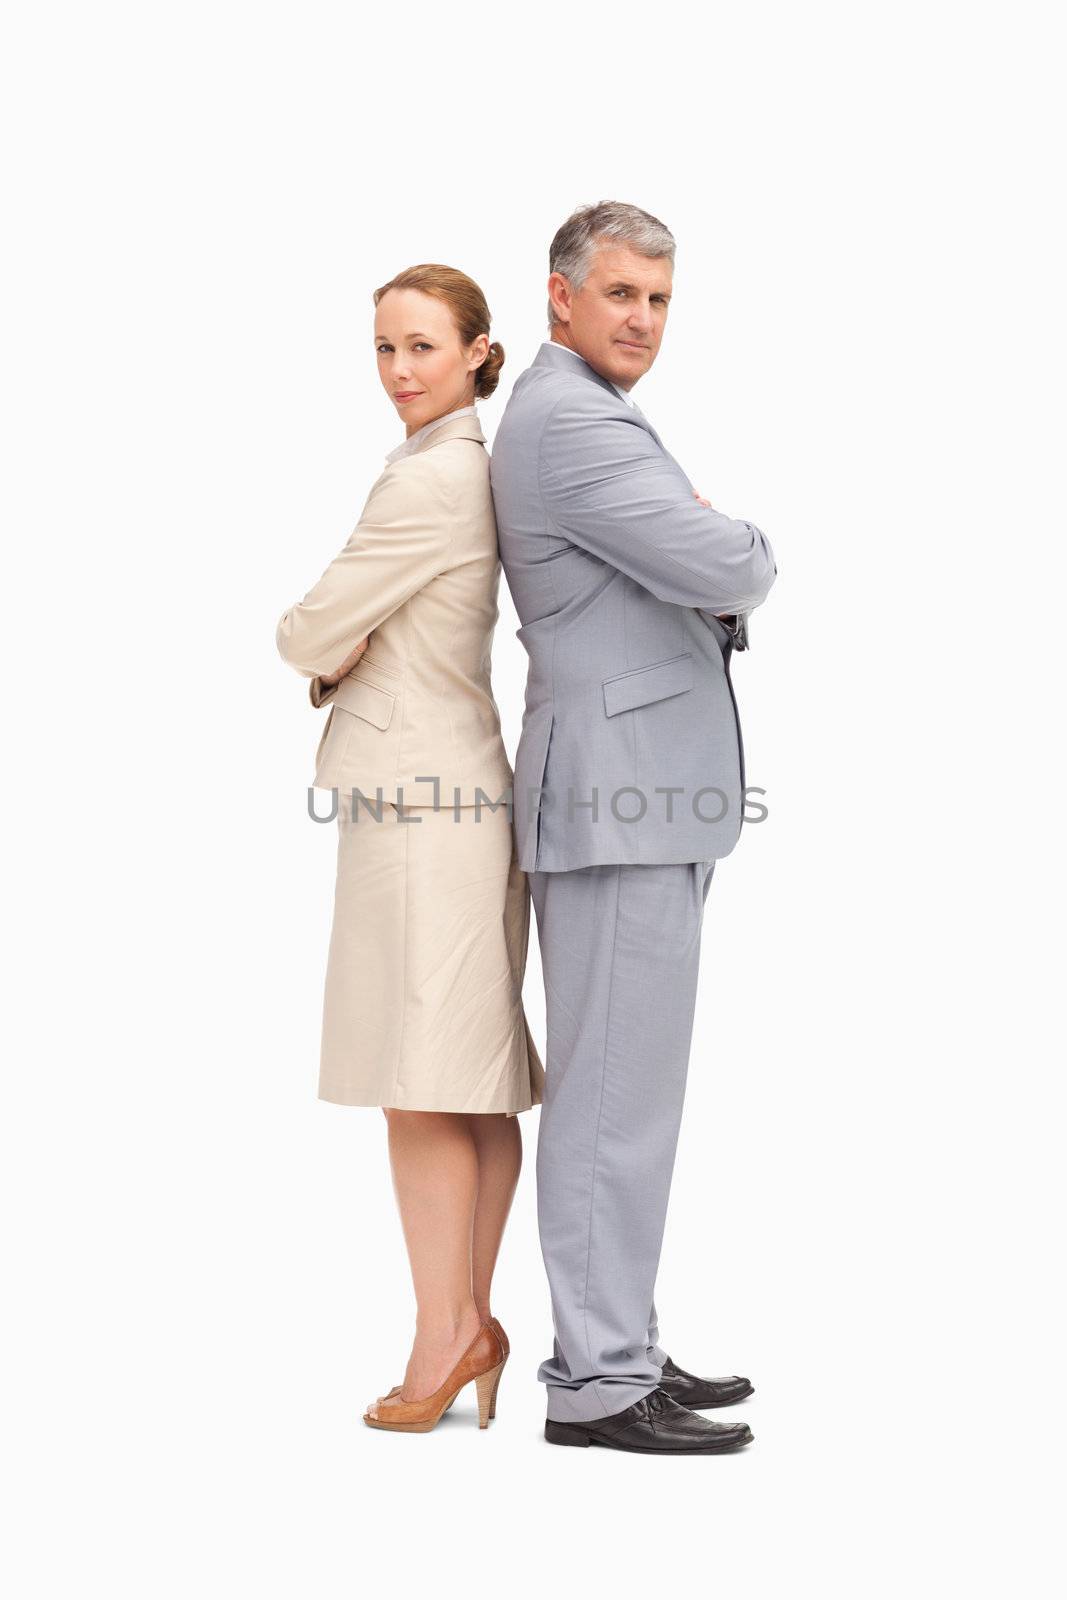 Portrait of business people back to back against white background